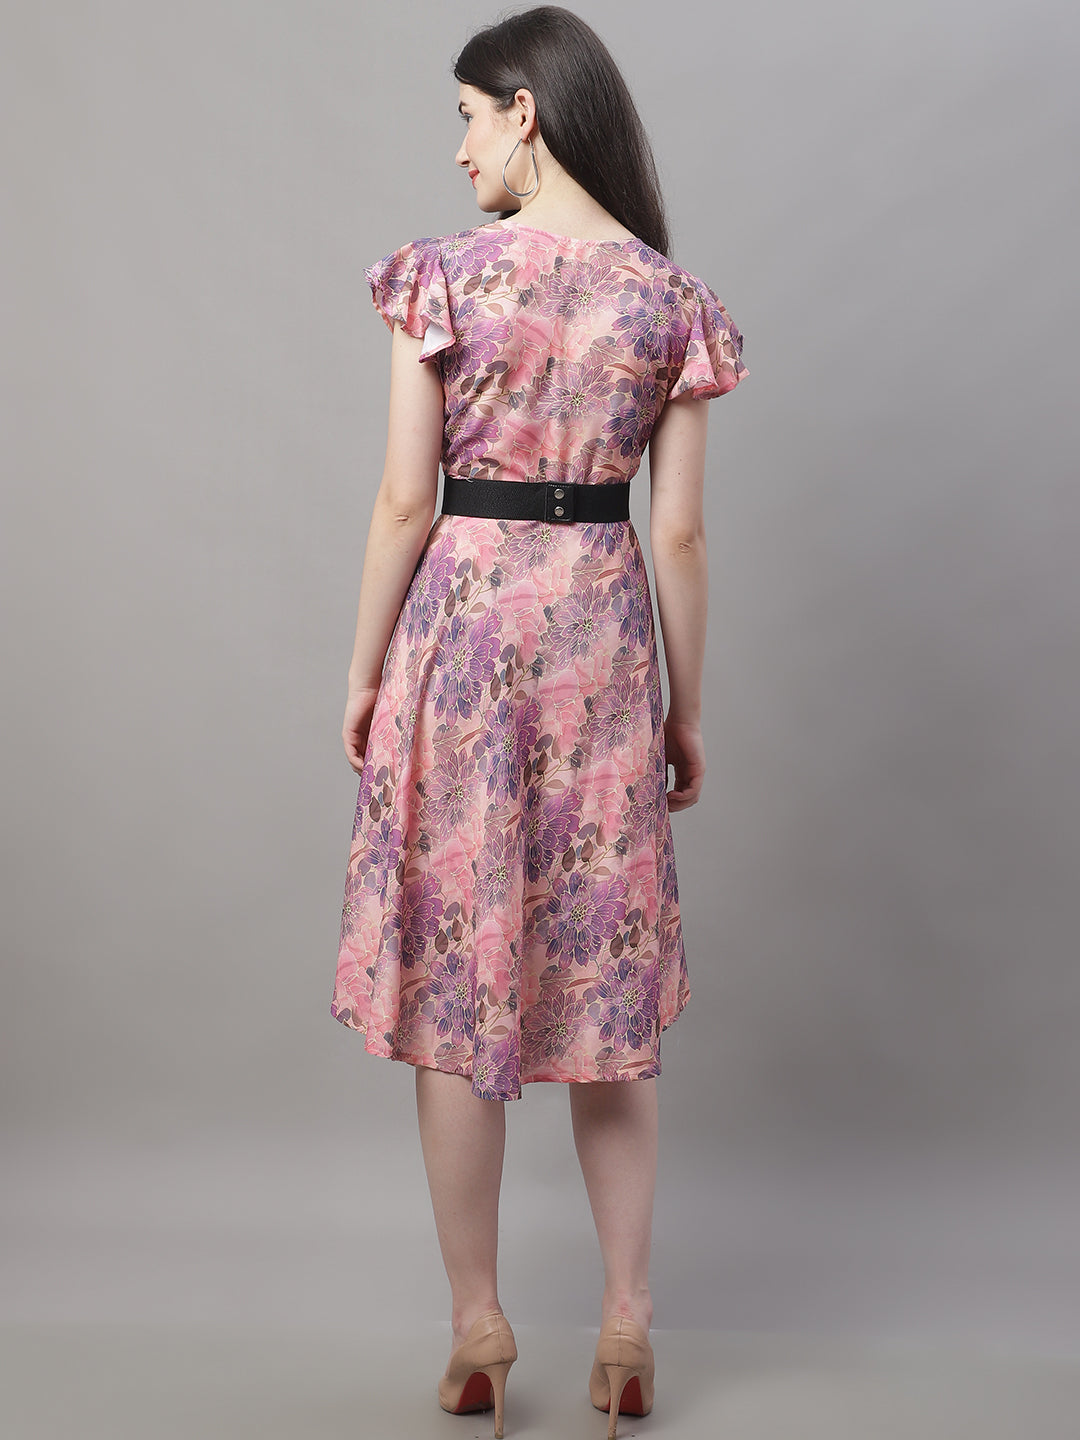 Women Pink Printed A-Line Dresses With Belt